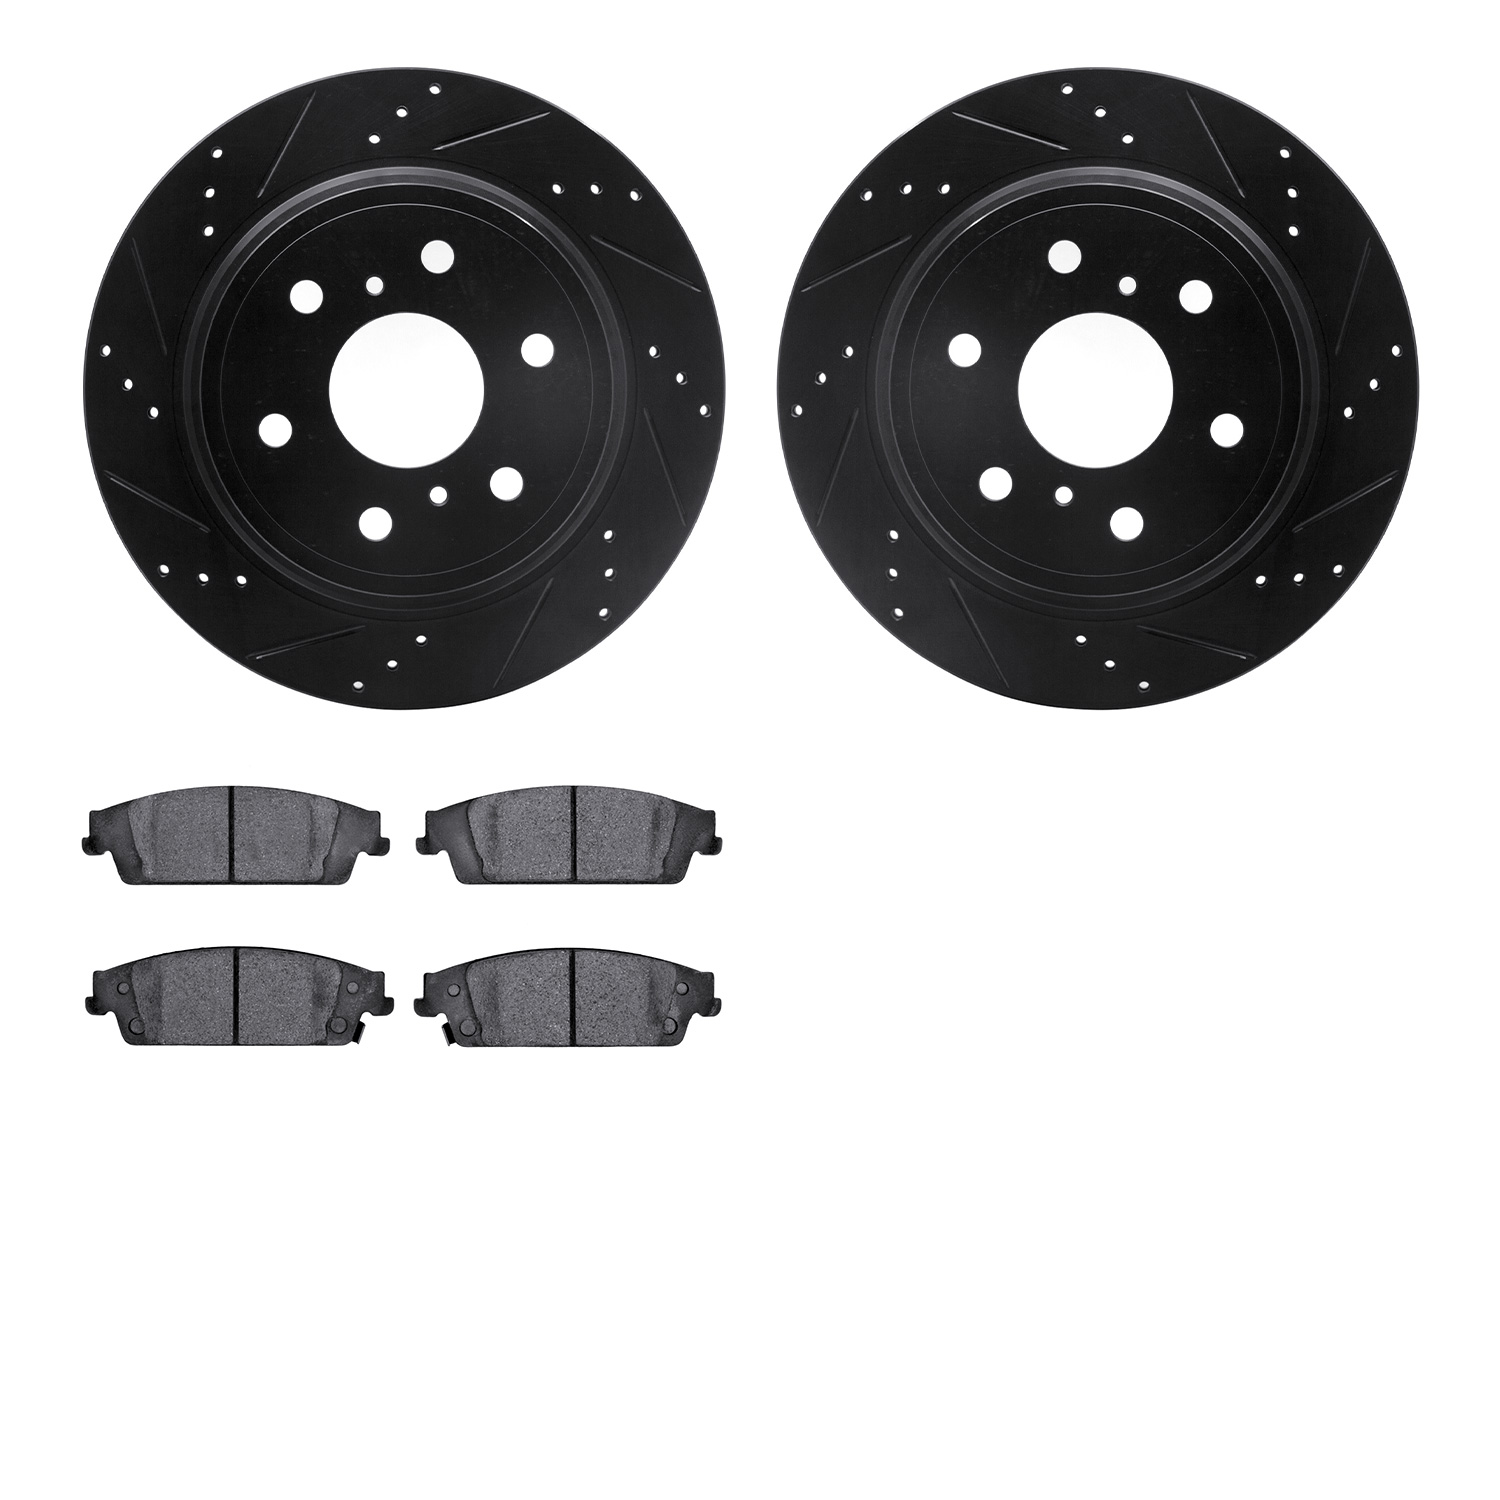 8402-48039 Drilled/Slotted Brake Rotors with Ultimate-Duty Brake Pads Kit [Black], 2014-2020 GM, Position: Rear